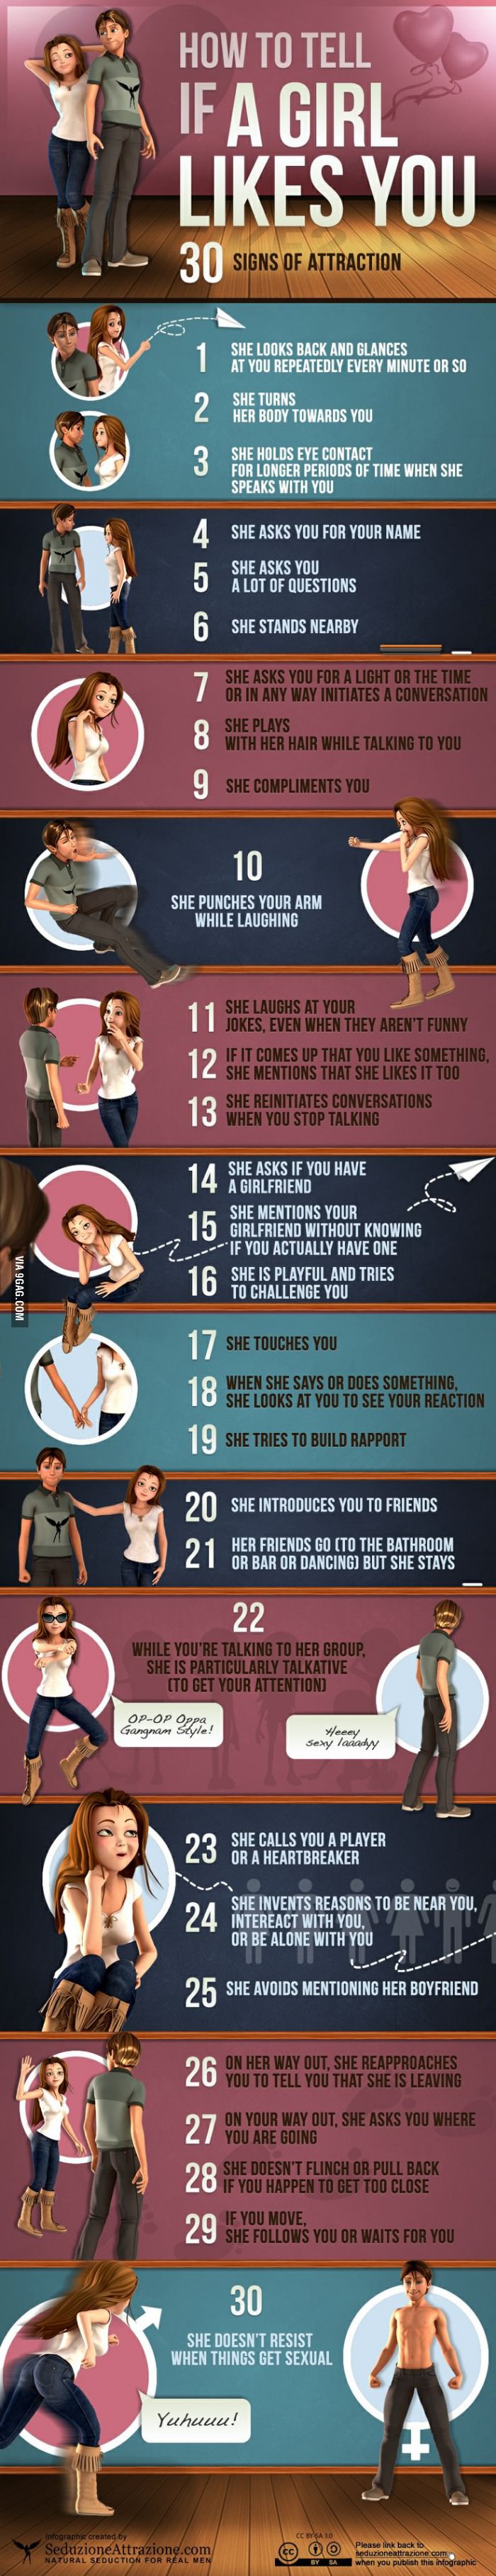 How To Tell If A Girl Likes You 30 Sign of Attraction